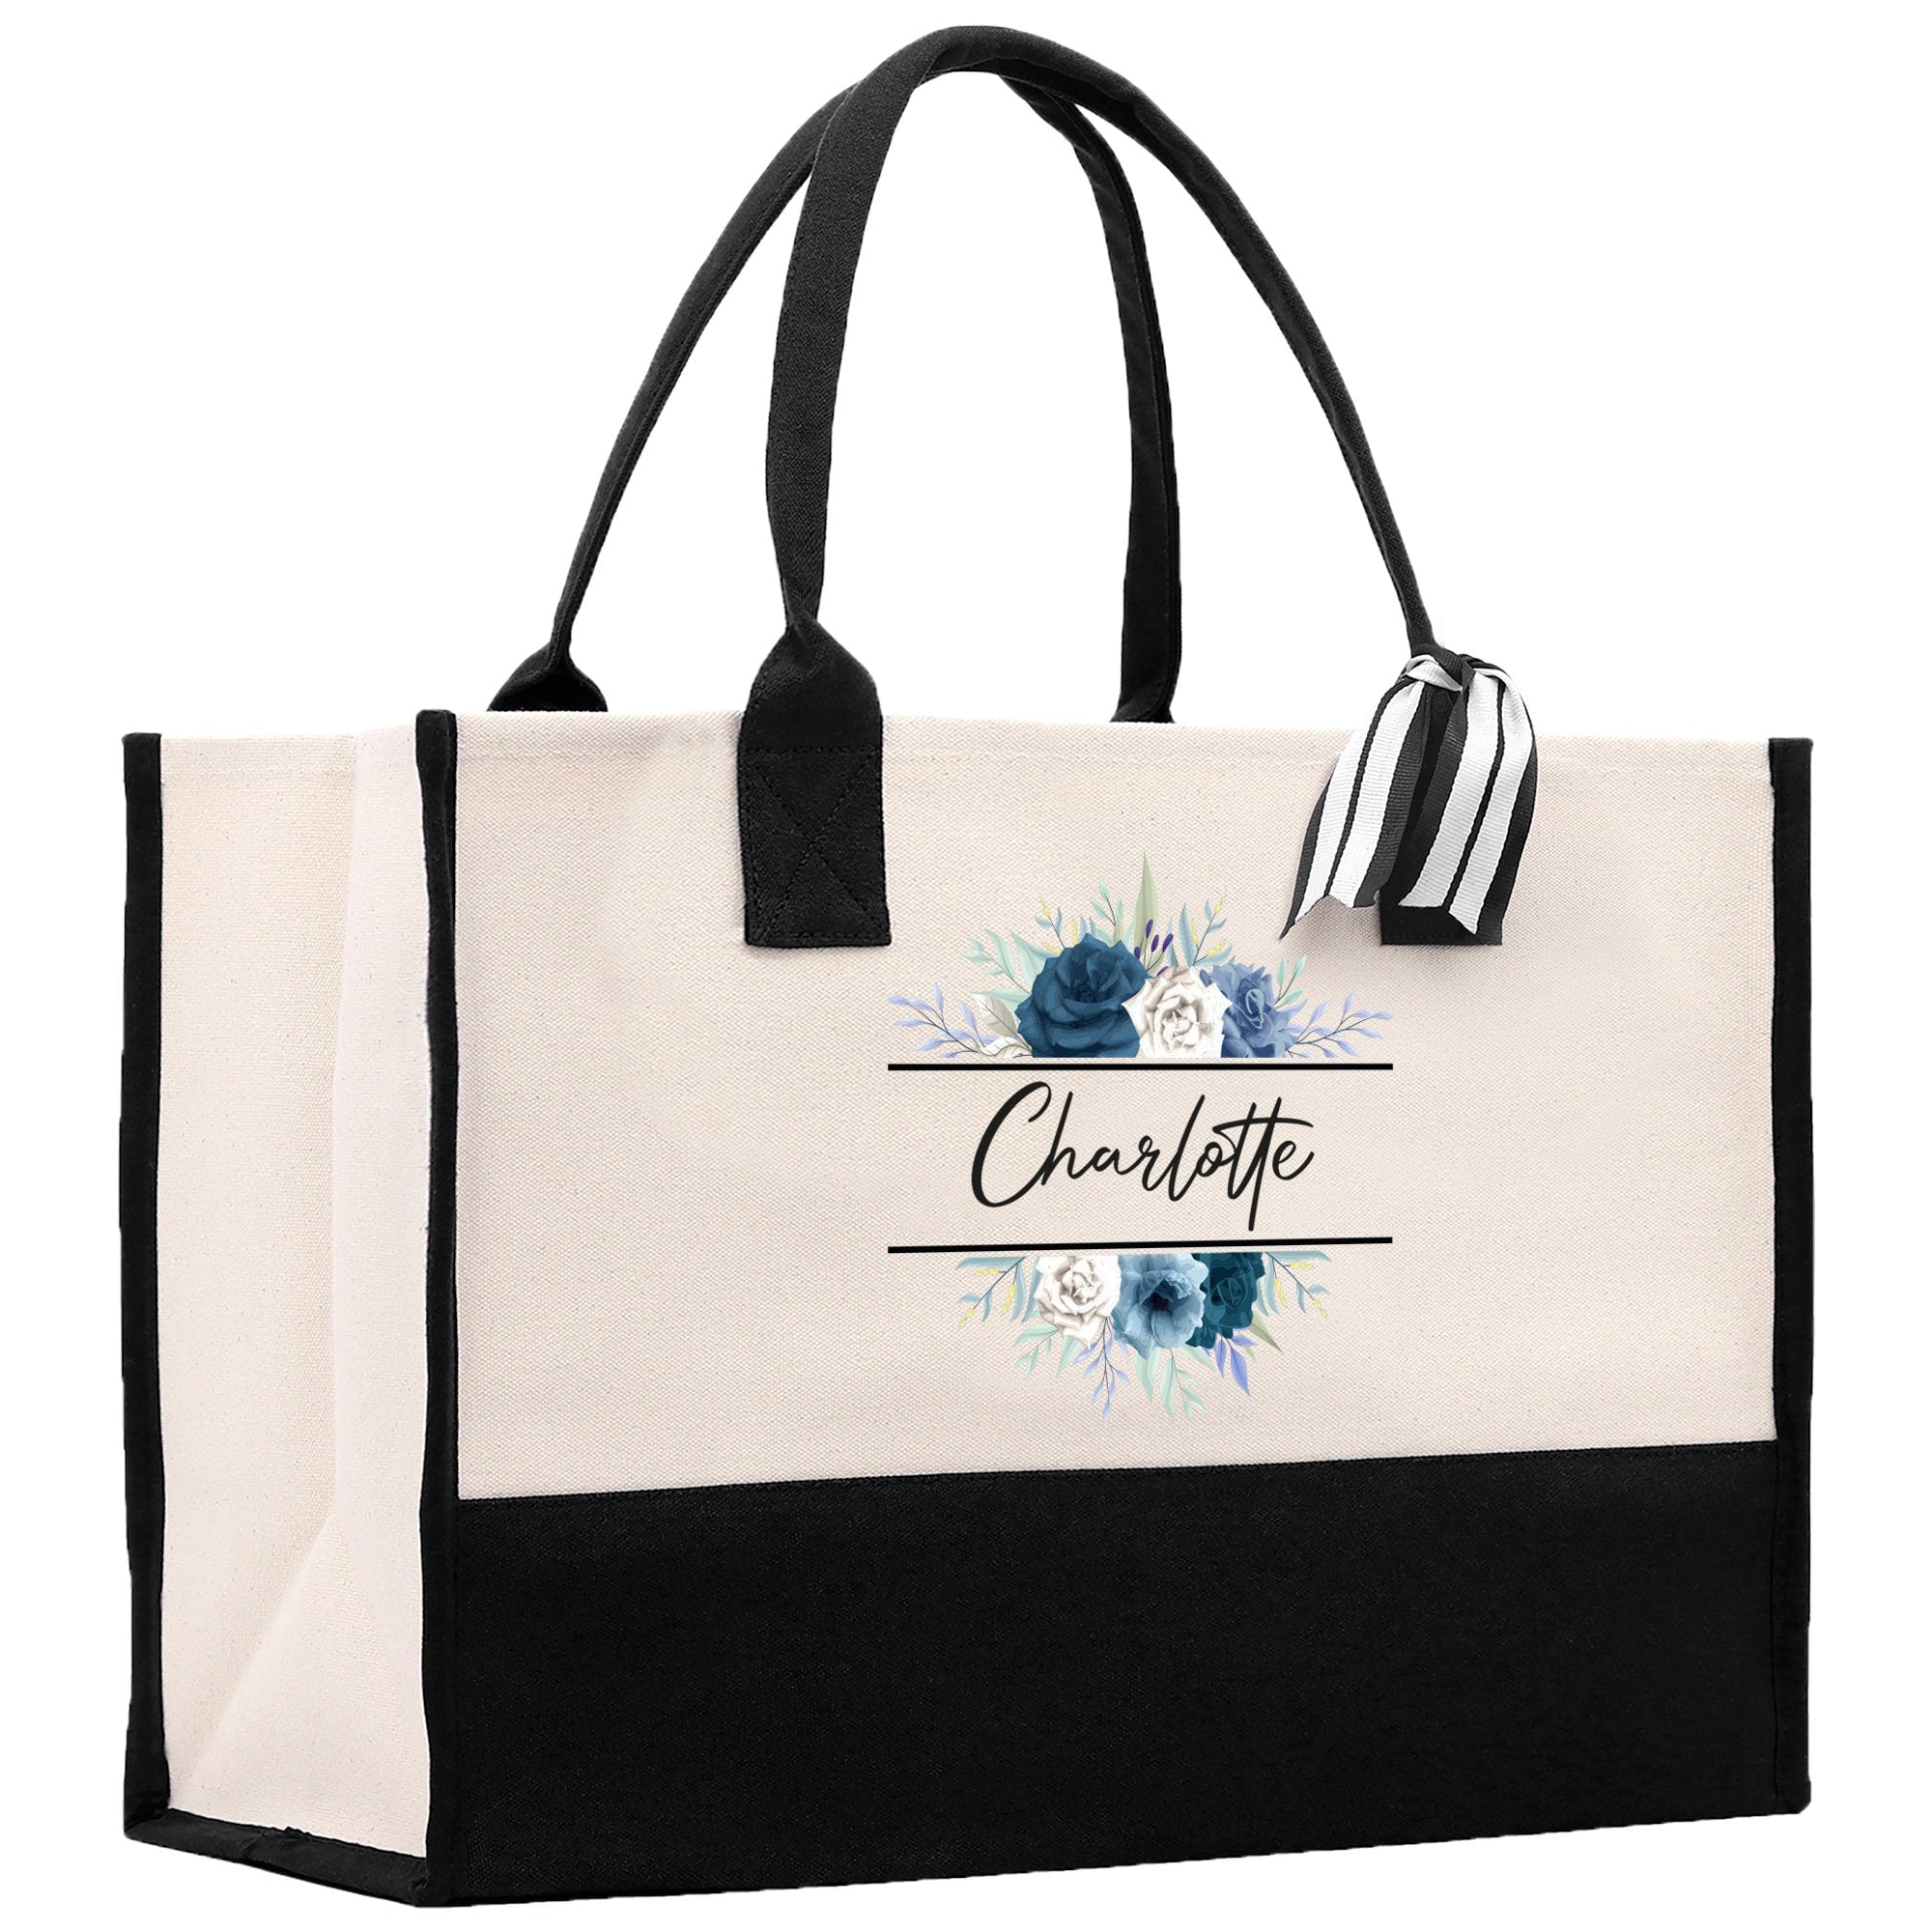 a black and white tote bag with blue flowers